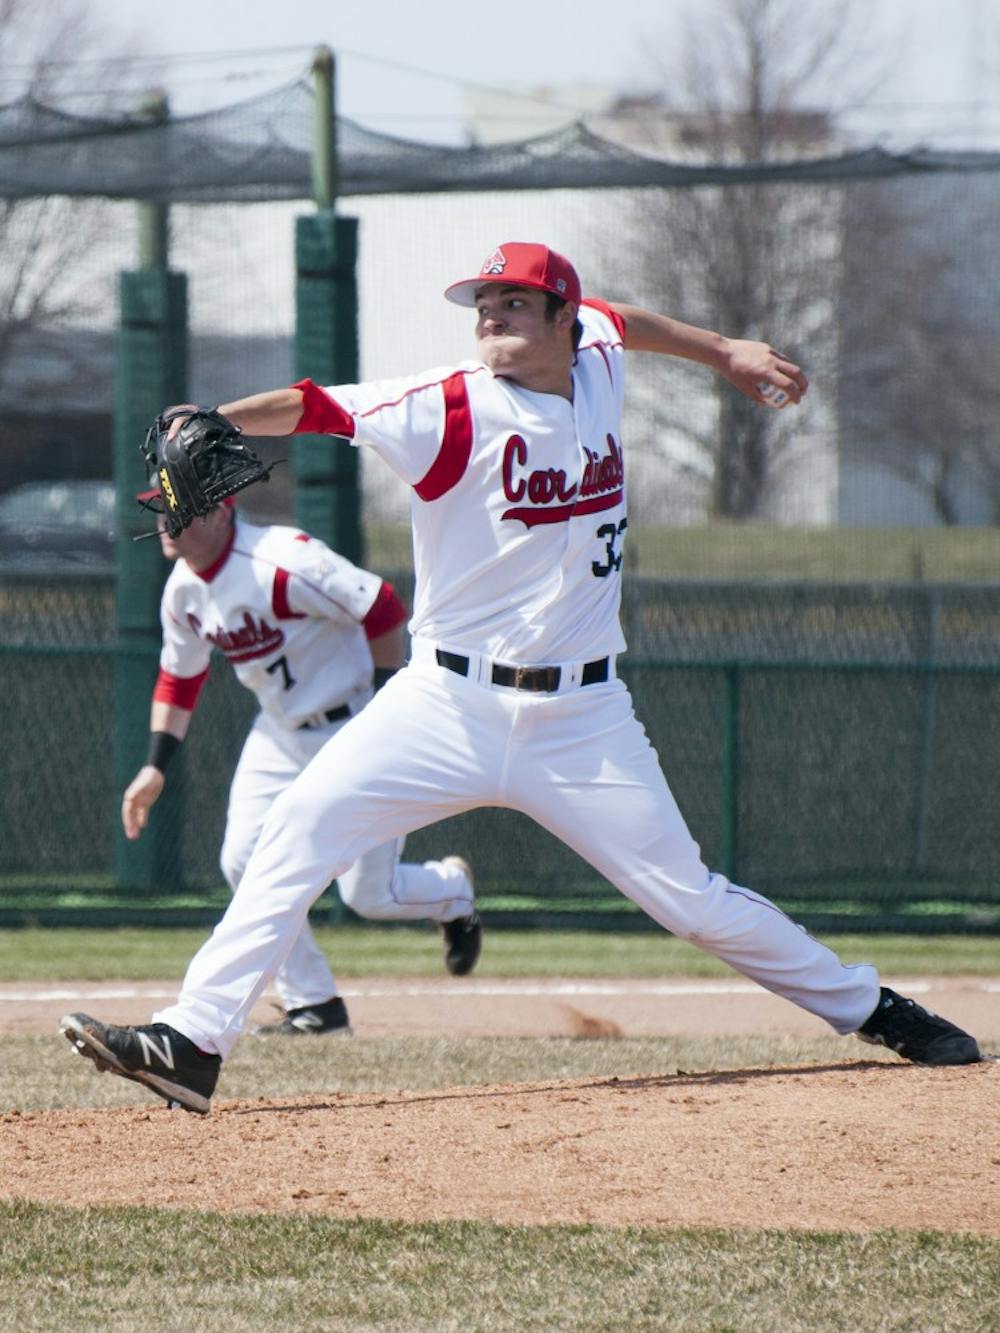 Senior pitcher Clay Manering pitches during a game against Northern Kentucky on April 3, 2013. Manering gave up three earned runs in the 3-4 loss against Dayton on Monday. DN FILE PHOTO JONATHAN MIKSANEK